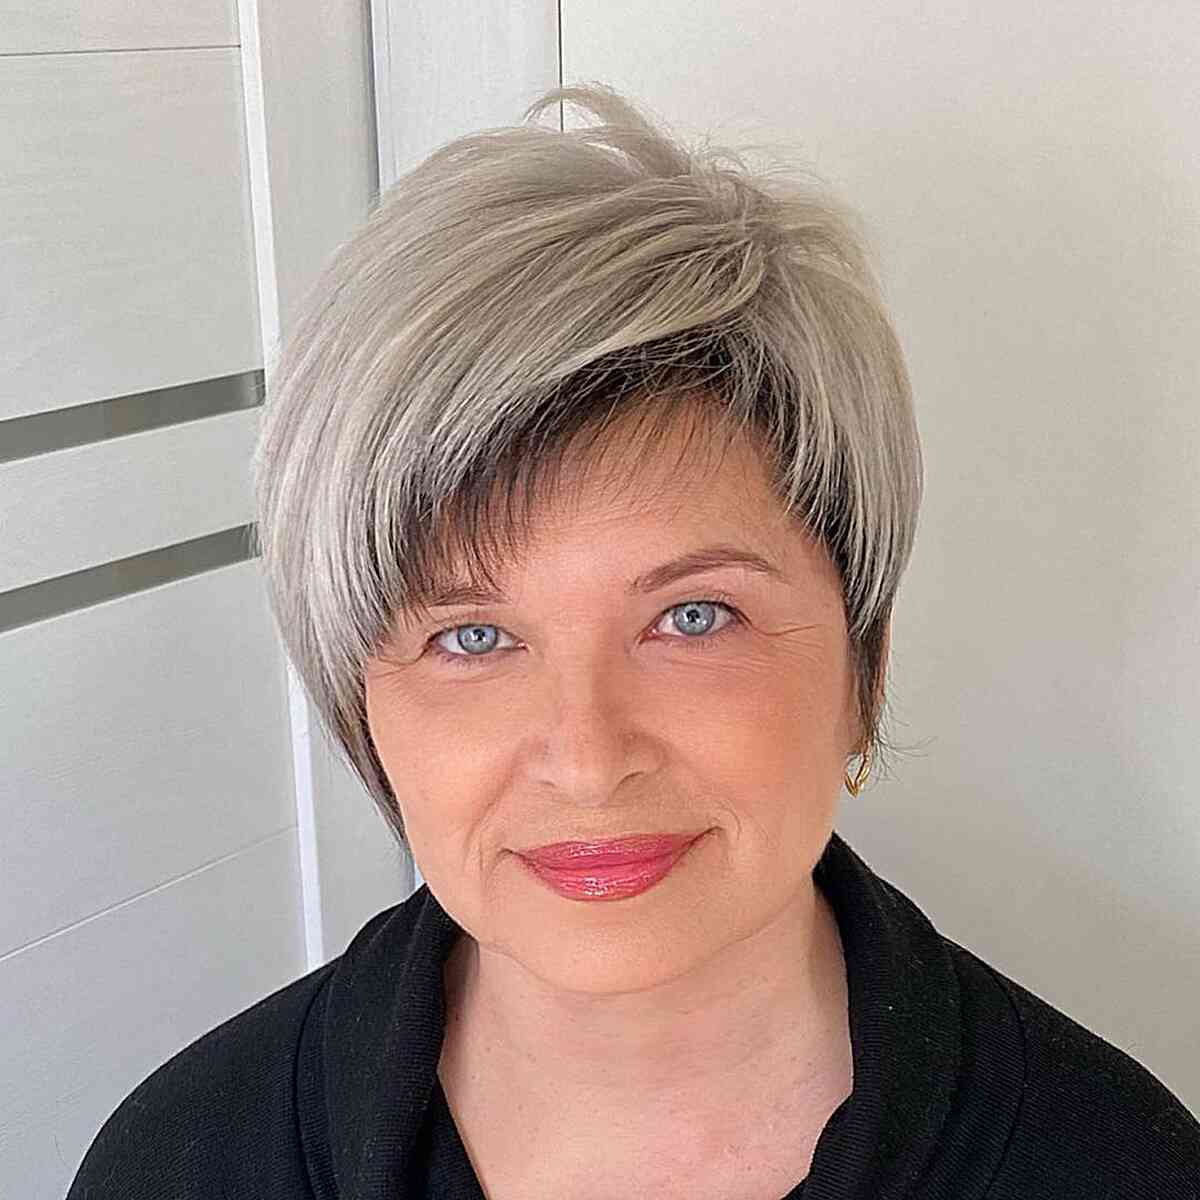 Long Edgy Pixie with Asymmetric Bangs for older women over 50 with round faces